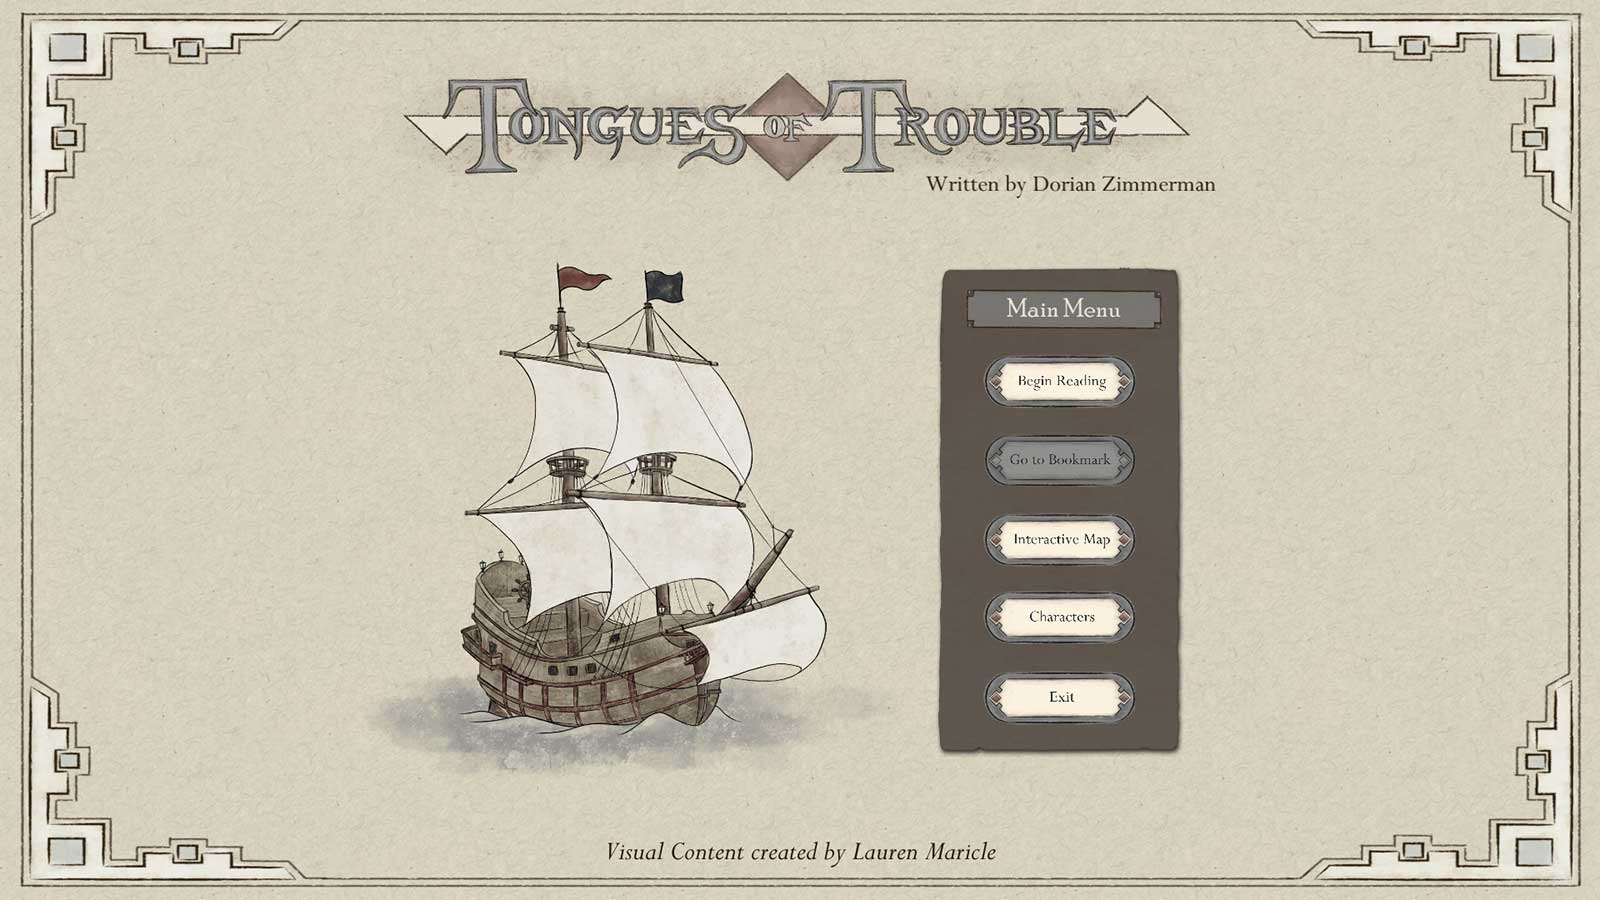 The starting menu screen for a visual novel named “Tongues of Trouble.” 